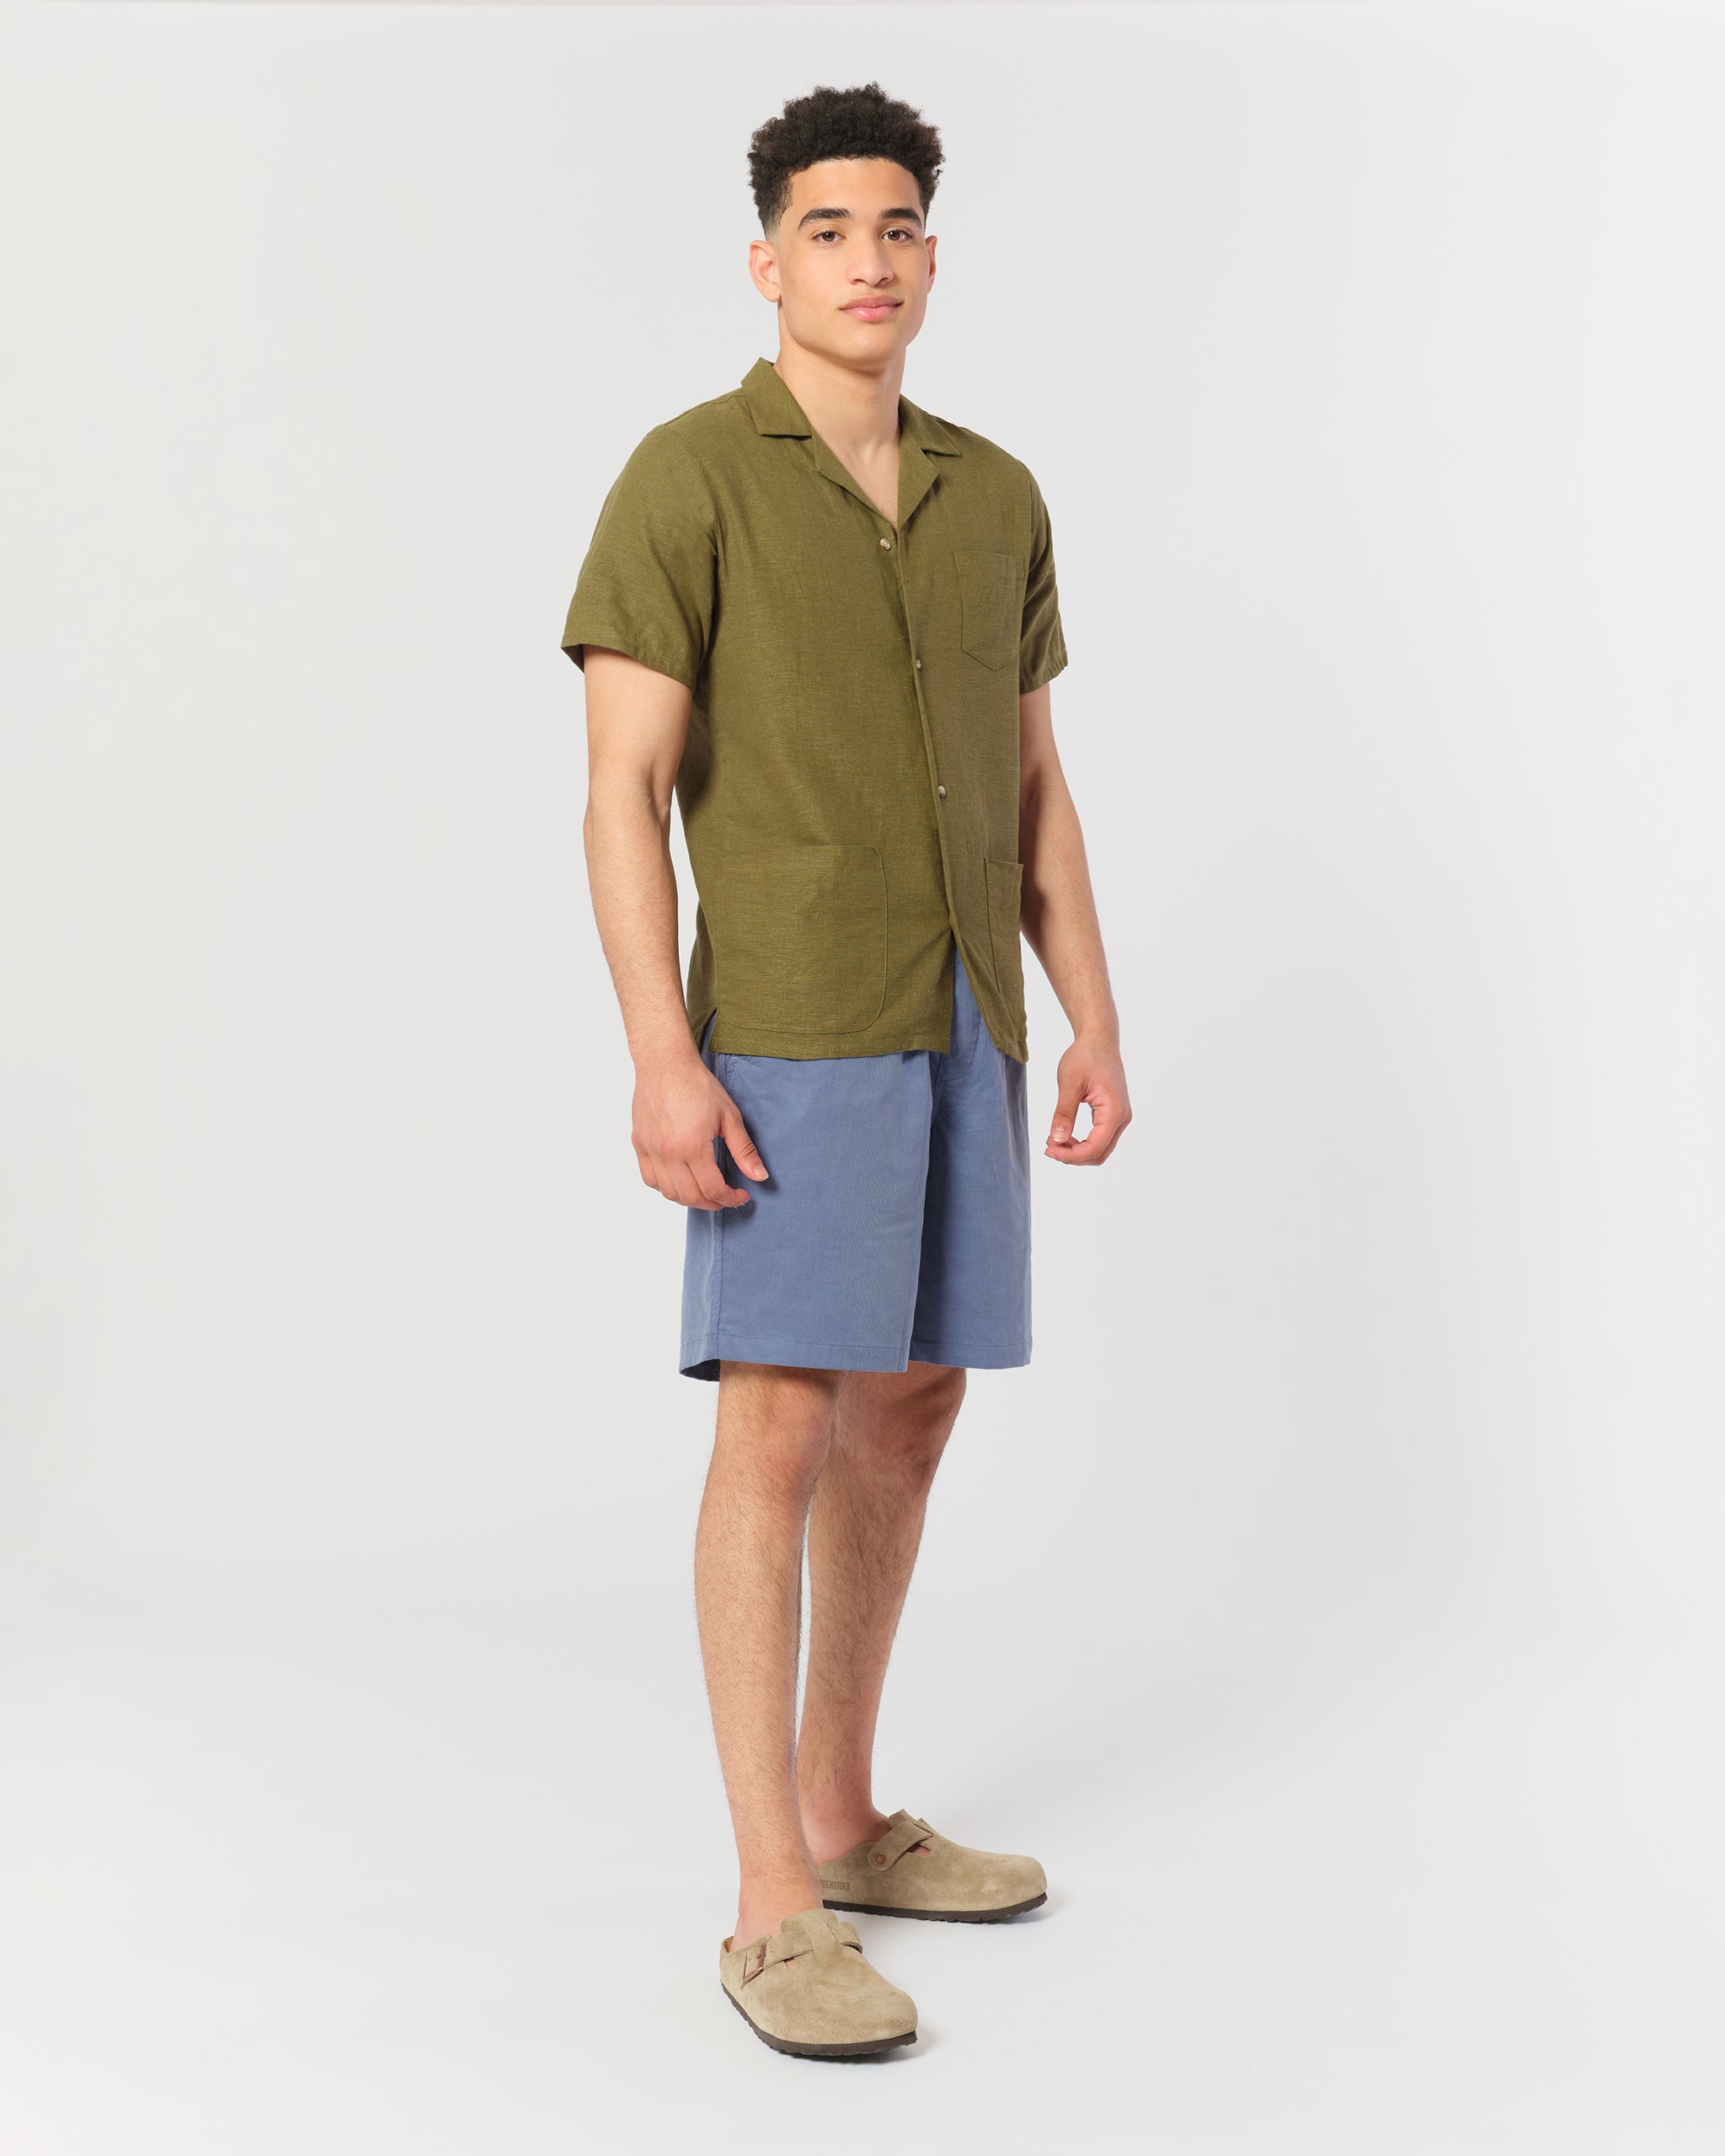 model wearing Solid Blue Cotton Corduroy Leisure Shorts